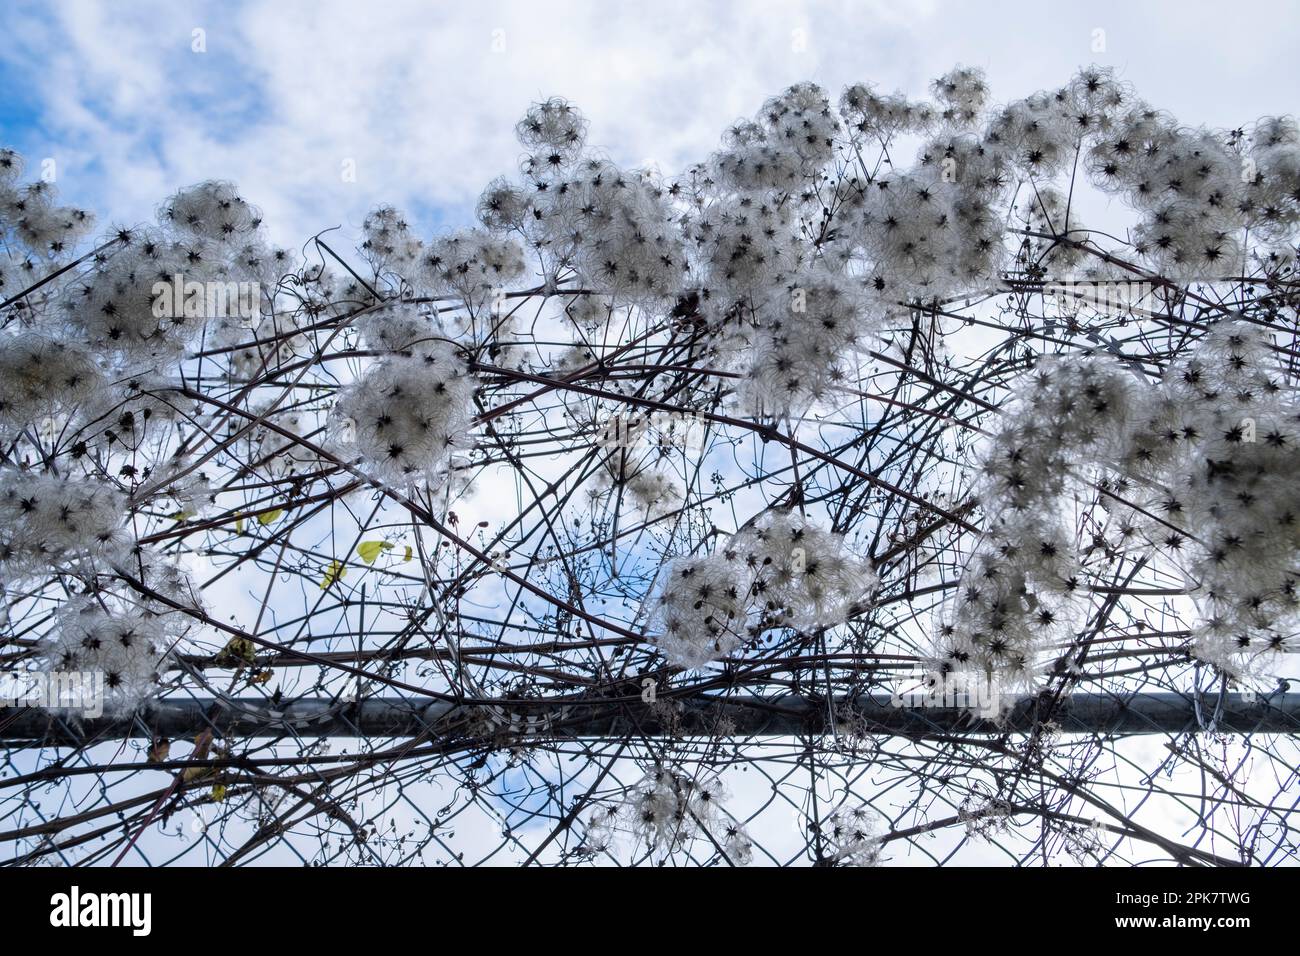 Flowering weeds growing on barbed wire fence, close up. Stock Photo